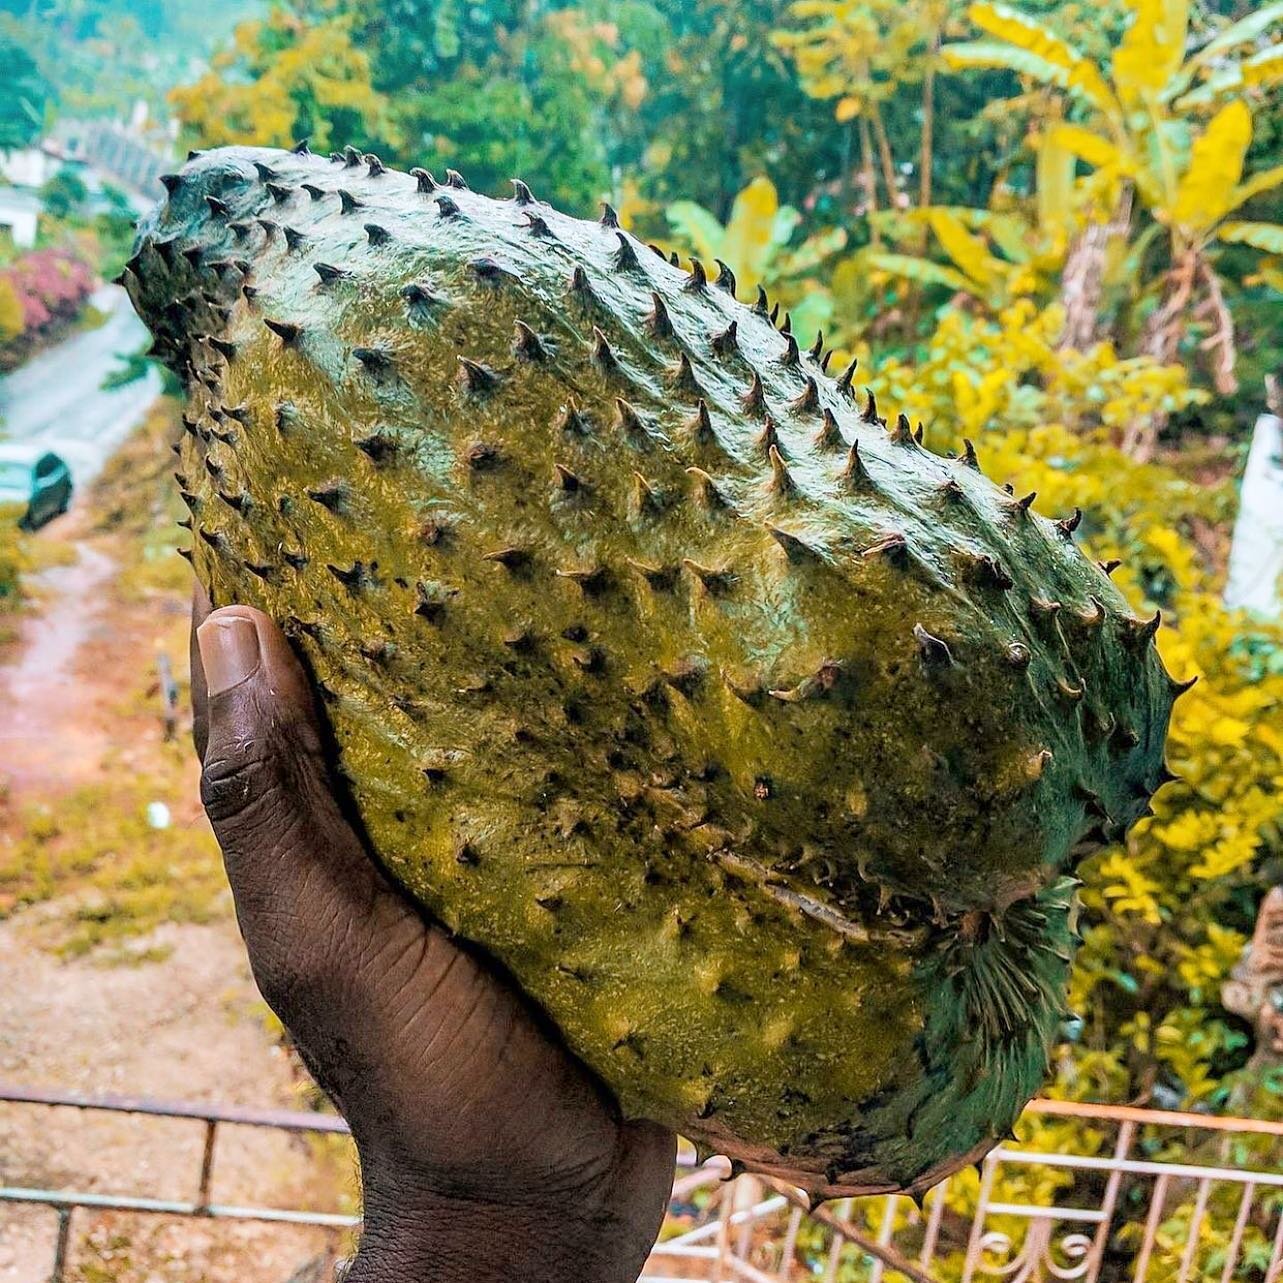 ⁉️What are doing with this? 
Juicing? 
Eating as is? 
Ice Cream? 😜

You guys know our pick. 😆 

#rp @exploringjamaica 

#islandpops